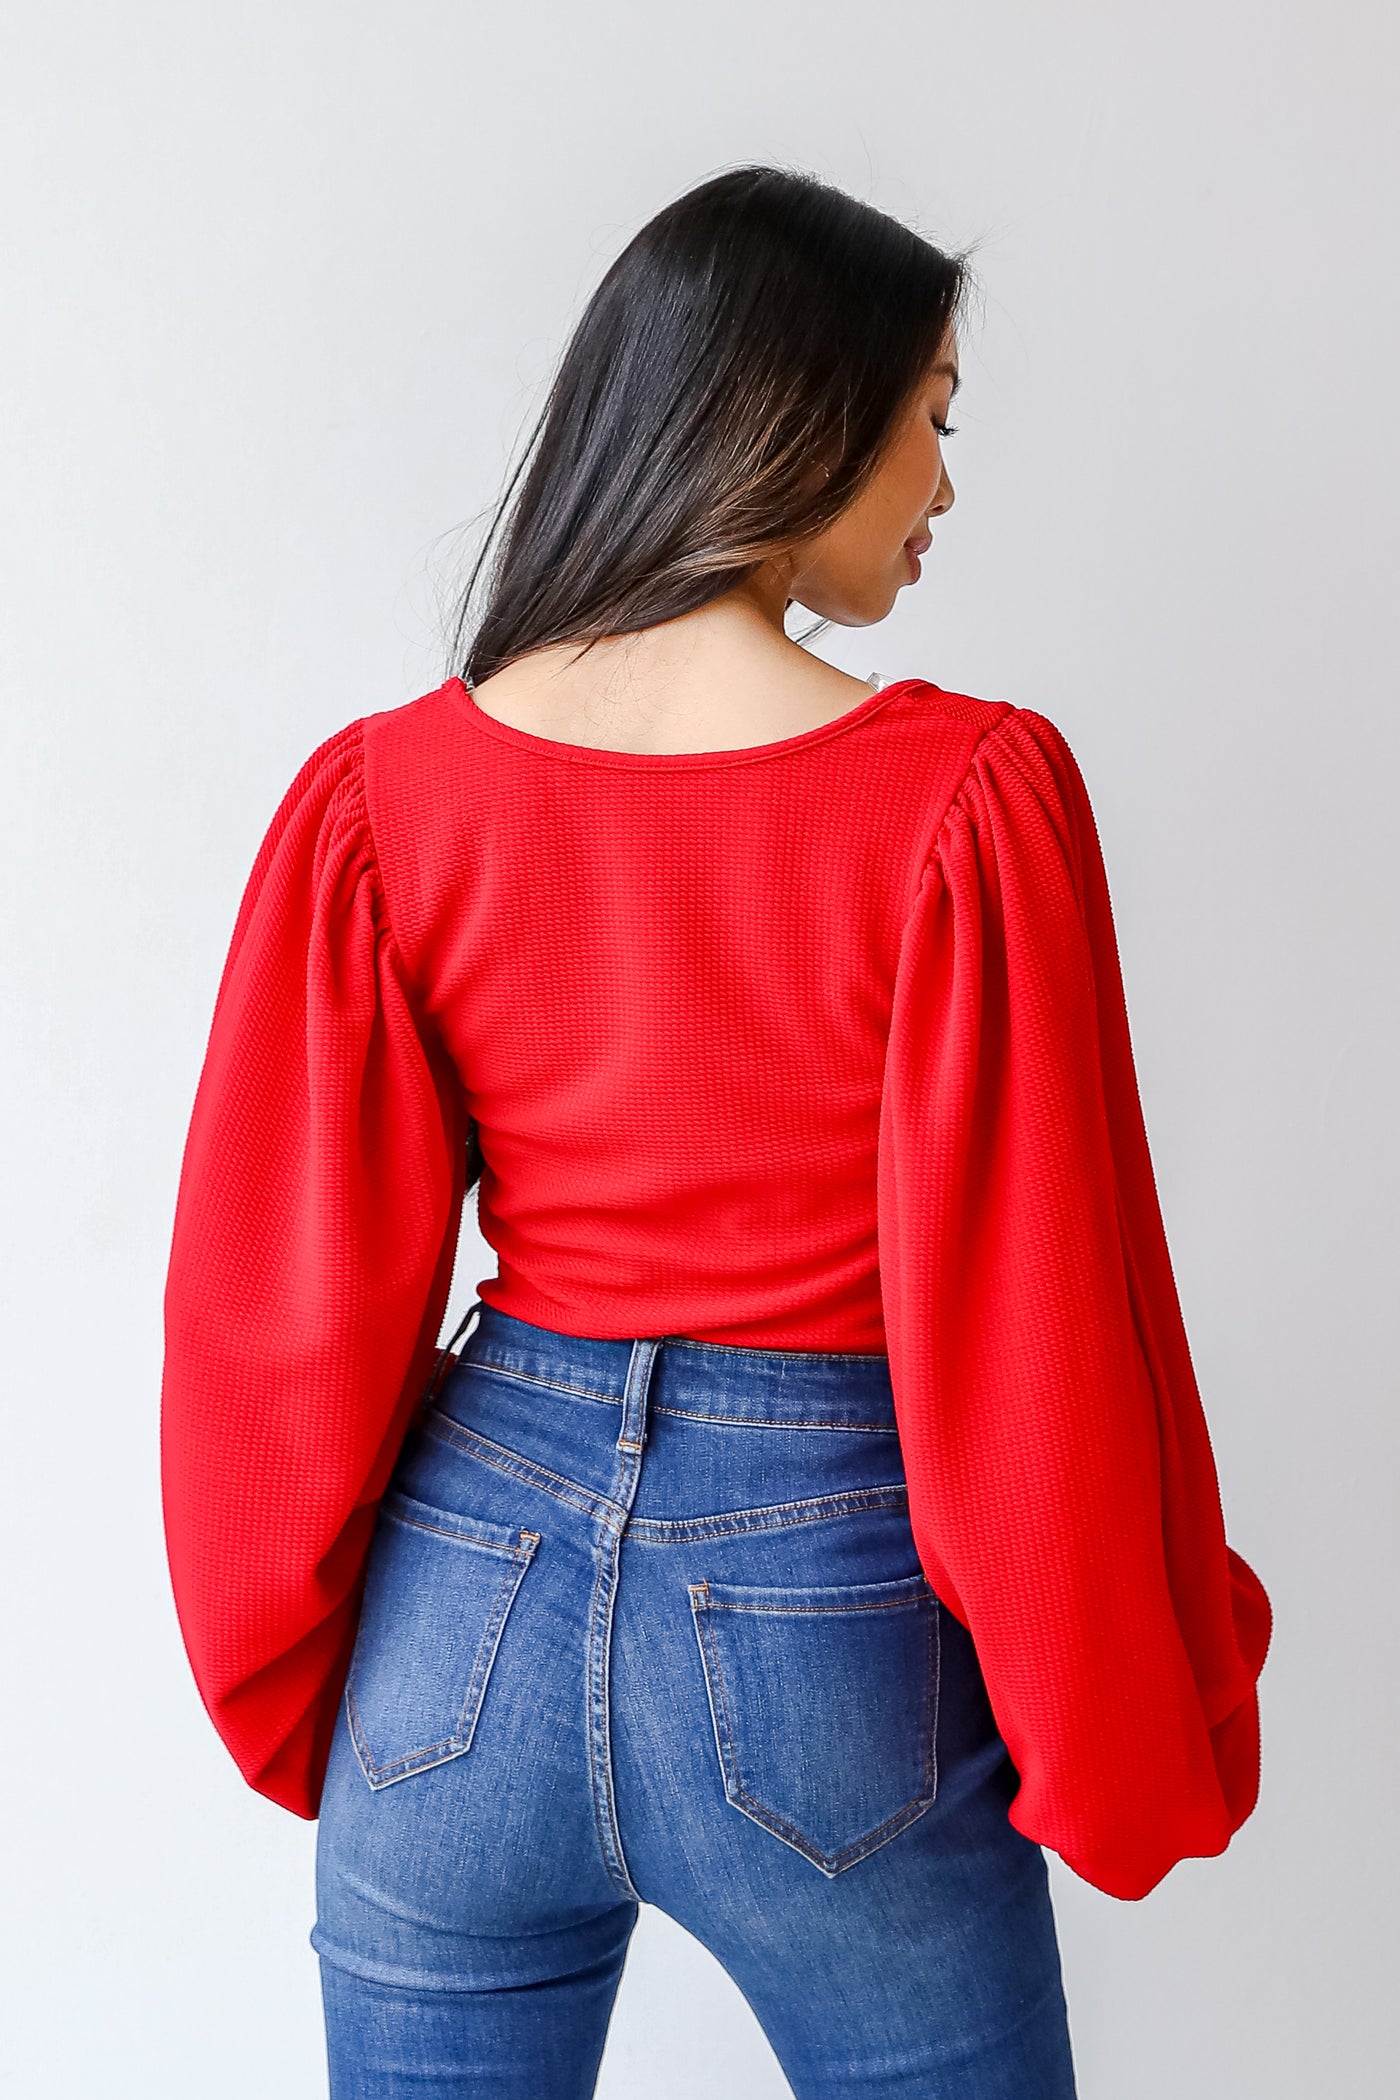 Blouse in red back view